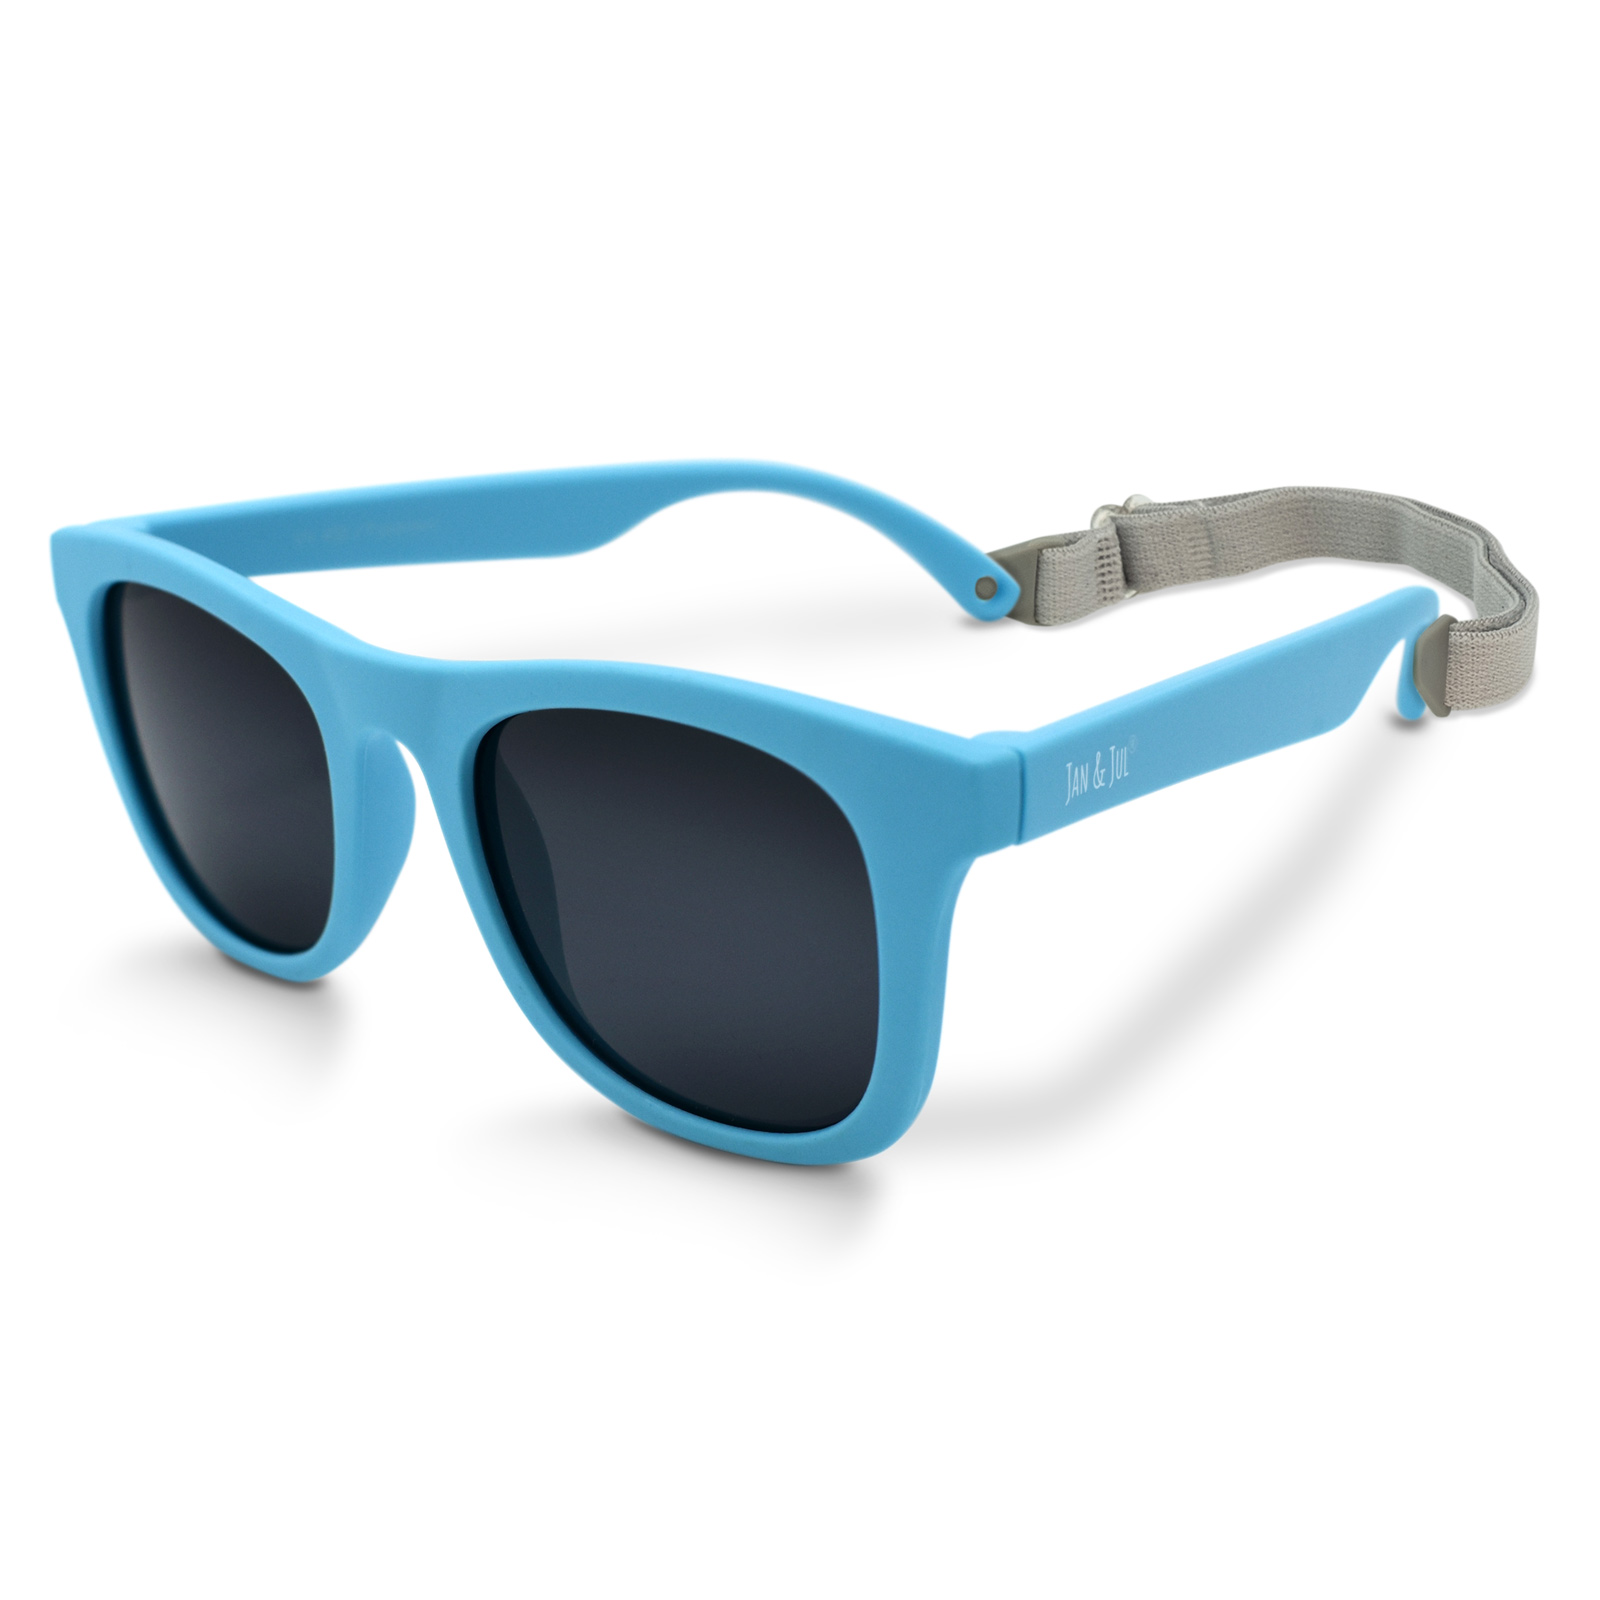 Jan & Jul Toddler Sunglasses Boys Girls with Adjustable Strap (M: 2 - 6 Years, Sky Blue) - image 1 of 7